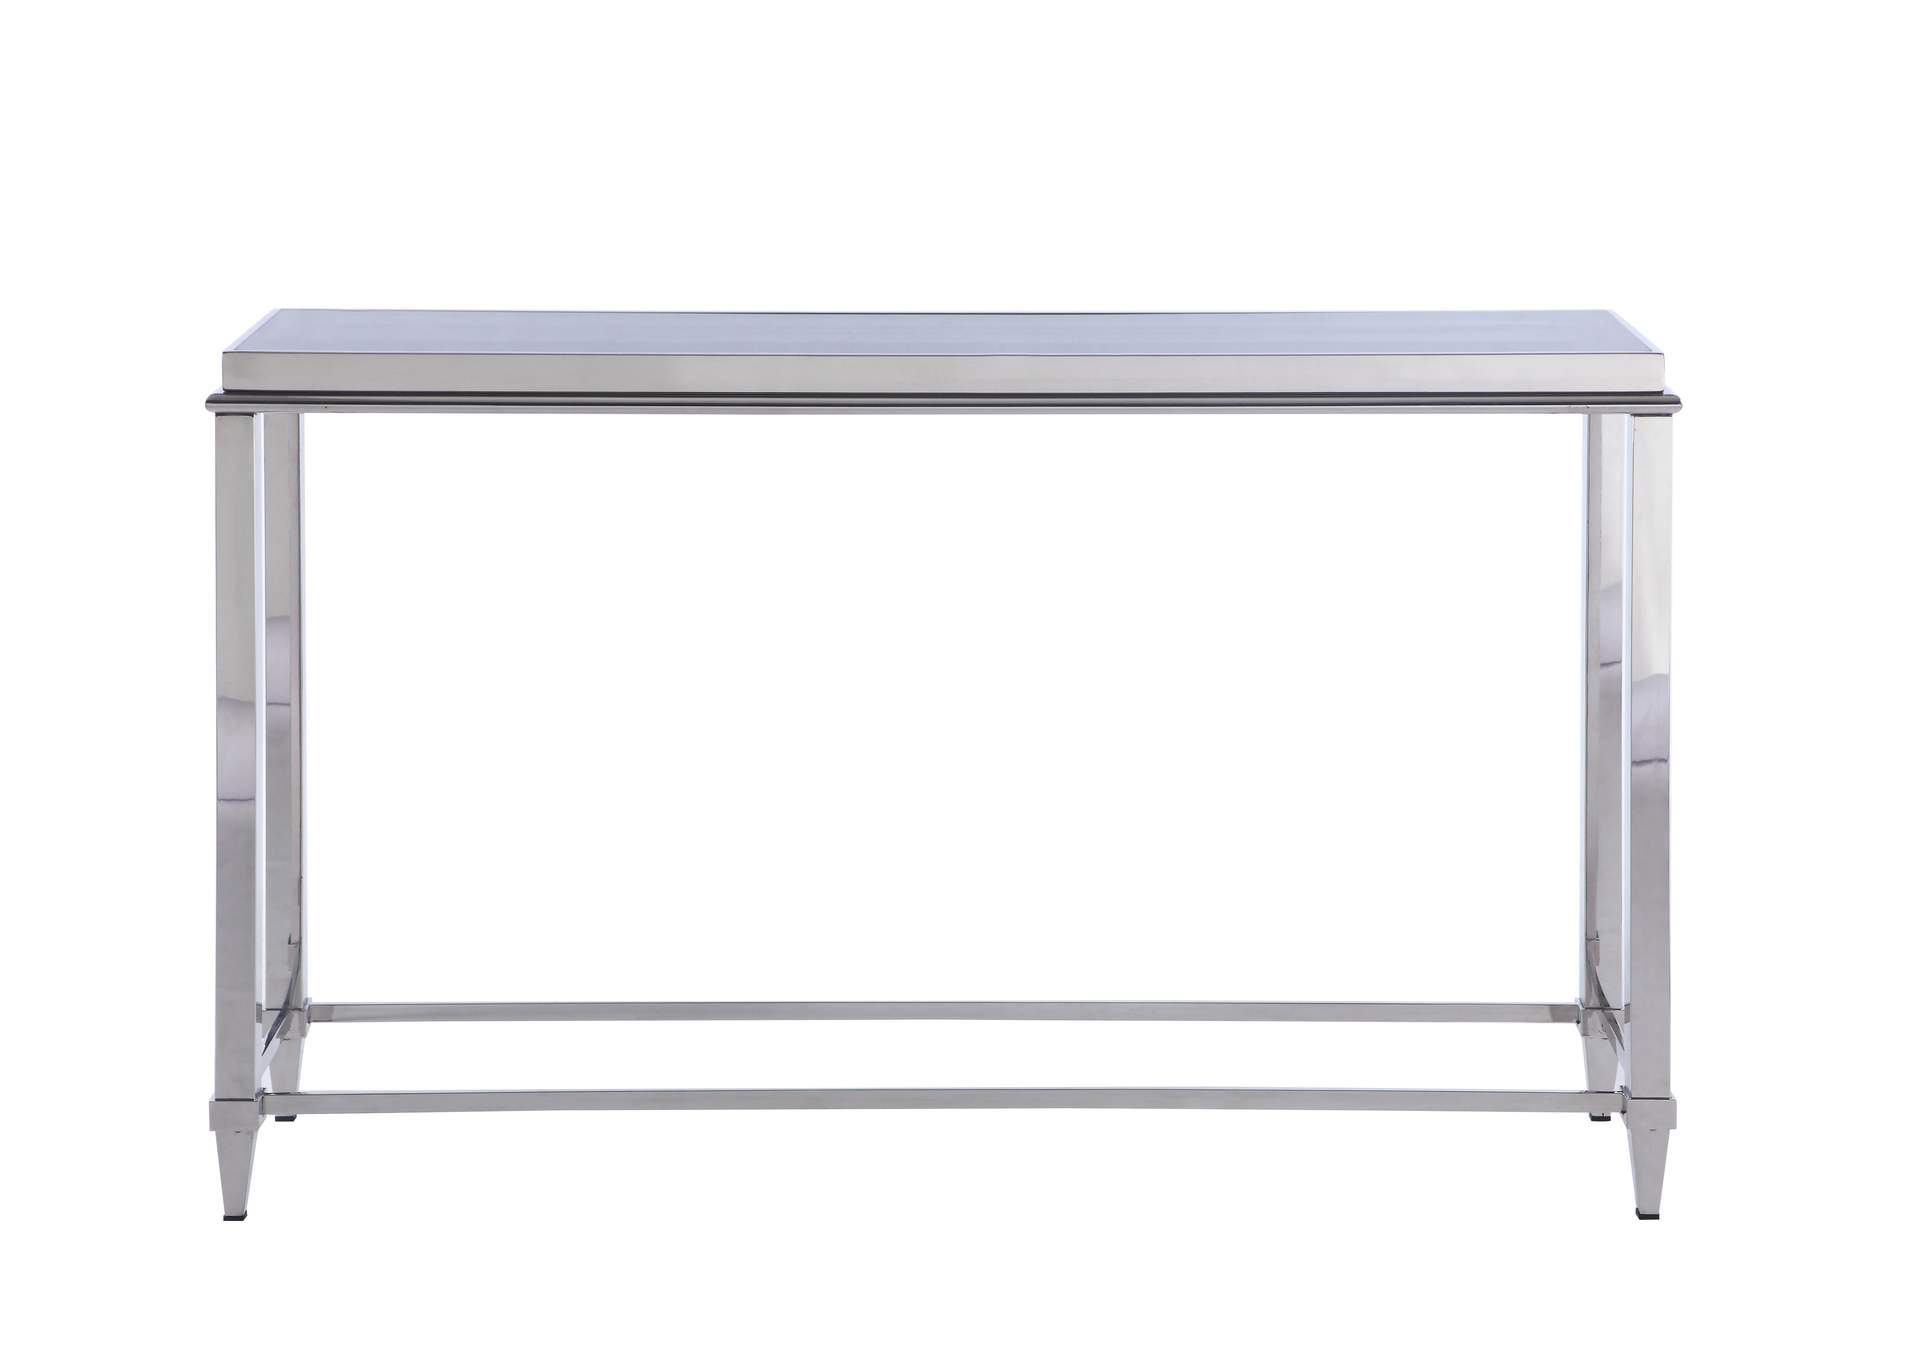 Contemporary Sofa Table With Glass Top & Gray Trim,Chintaly Imports